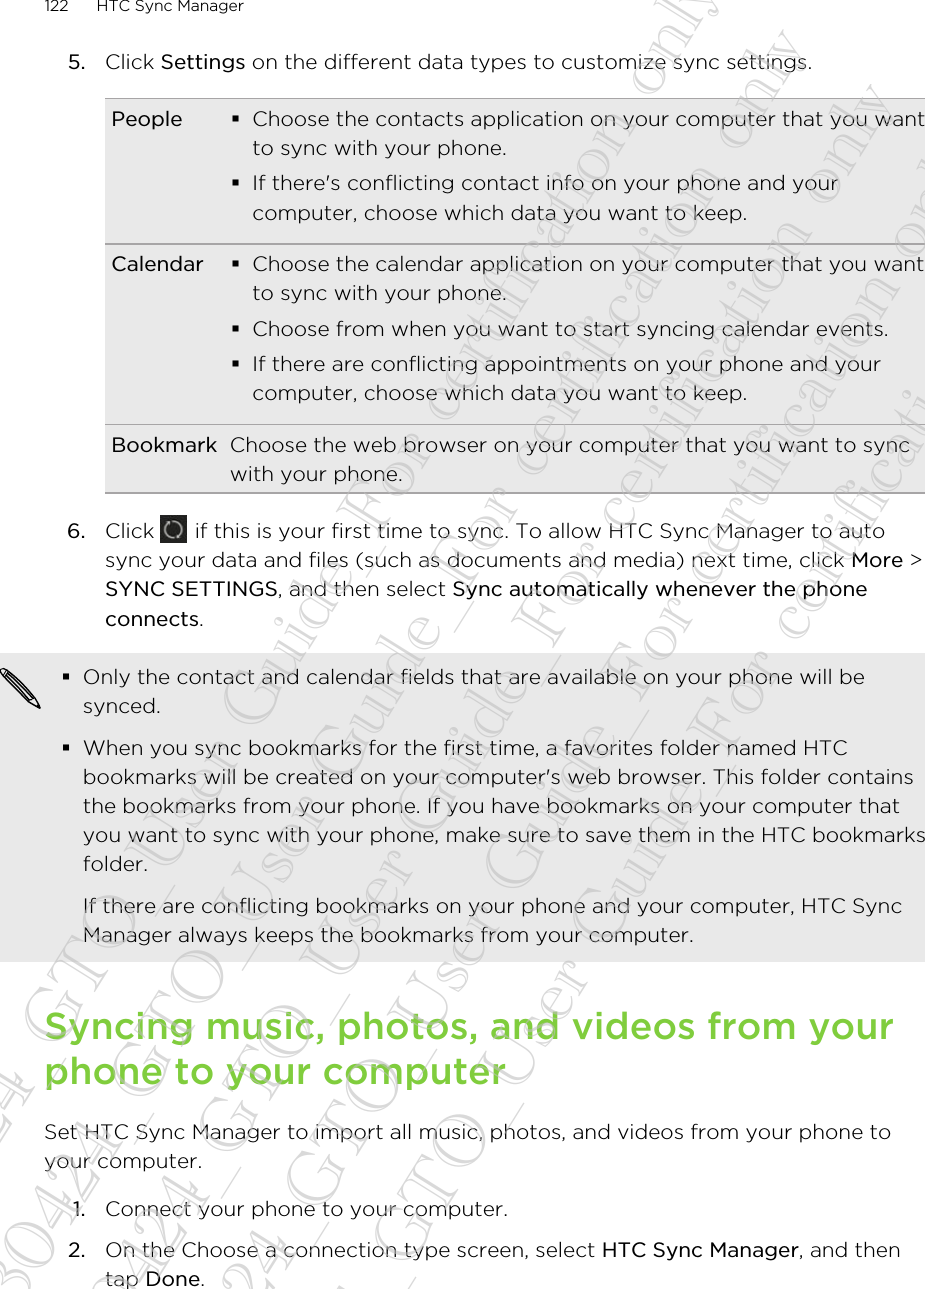 5. Click Settings on the different data types to customize sync settings.People §Choose the contacts application on your computer that you wantto sync with your phone.§If there&apos;s conflicting contact info on your phone and yourcomputer, choose which data you want to keep.Calendar §Choose the calendar application on your computer that you wantto sync with your phone.§Choose from when you want to start syncing calendar events.§If there are conflicting appointments on your phone and yourcomputer, choose which data you want to keep.Bookmark Choose the web browser on your computer that you want to syncwith your phone.6. Click   if this is your first time to sync. To allow HTC Sync Manager to autosync your data and files (such as documents and media) next time, click More &gt;SYNC SETTINGS, and then select Sync automatically whenever the phoneconnects.§Only the contact and calendar fields that are available on your phone will besynced.§When you sync bookmarks for the first time, a favorites folder named HTCbookmarks will be created on your computer&apos;s web browser. This folder containsthe bookmarks from your phone. If you have bookmarks on your computer thatyou want to sync with your phone, make sure to save them in the HTC bookmarksfolder.If there are conflicting bookmarks on your phone and your computer, HTC SyncManager always keeps the bookmarks from your computer.Syncing music, photos, and videos from yourphone to your computerSet HTC Sync Manager to import all music, photos, and videos from your phone toyour computer.1. Connect your phone to your computer.2. On the Choose a connection type screen, select HTC Sync Manager, and thentap Done.122 HTC Sync Manager20130424_GTO_User Guide_For certification only 20130424_GTO_User Guide_For certification only 20130424_GTO_User Guide_For certification only 20130424_GTO_User Guide_For certification only 20130424_GTO_User Guide_For certification only